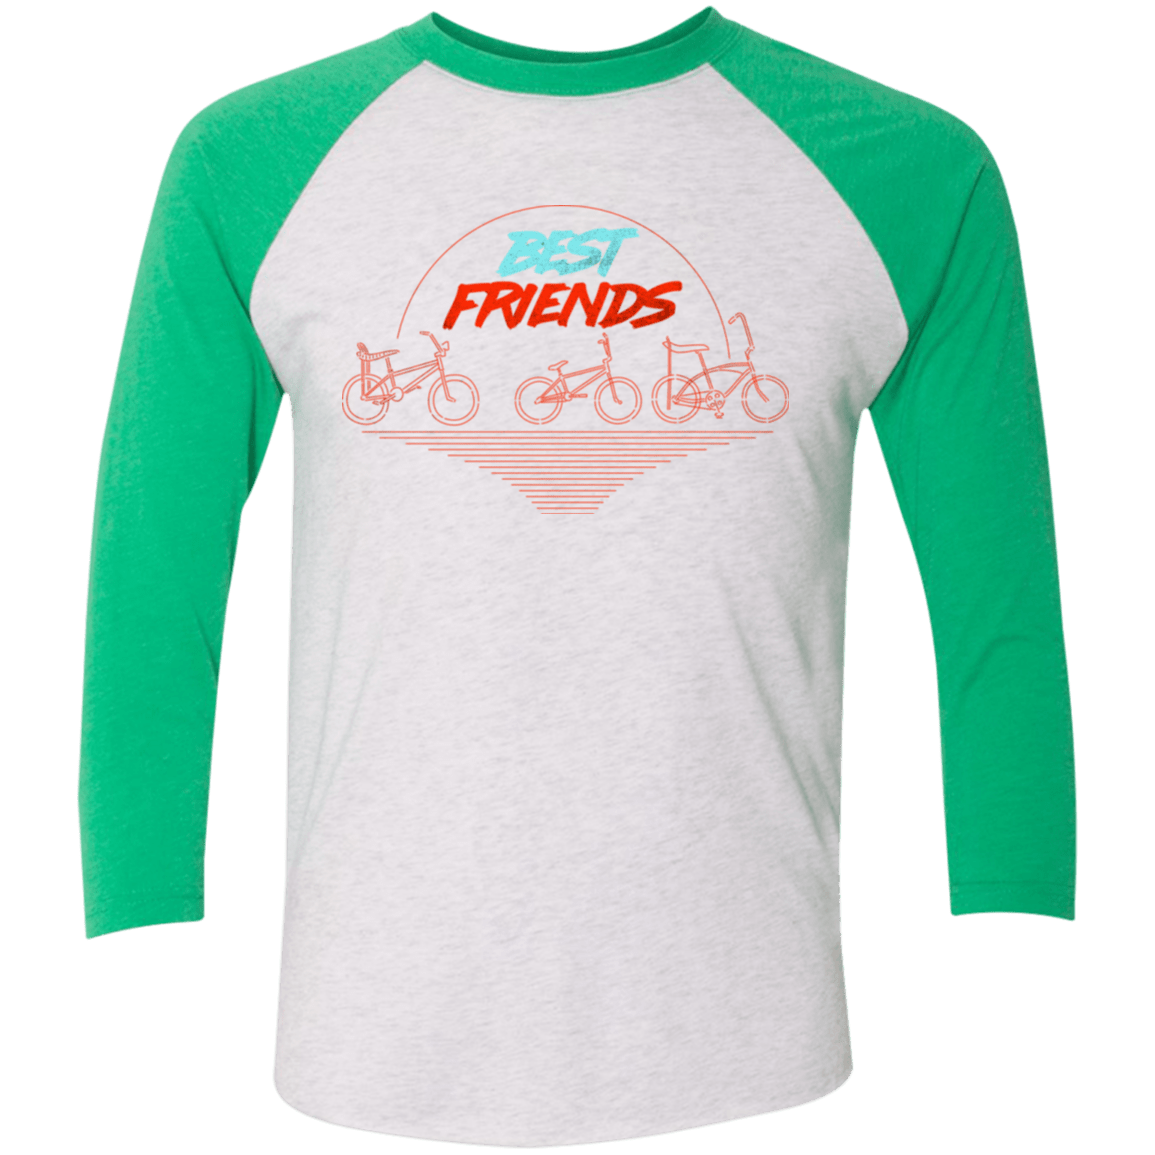 T-Shirts Heather White/Envy / X-Small Best Friends Men's Triblend 3/4 Sleeve